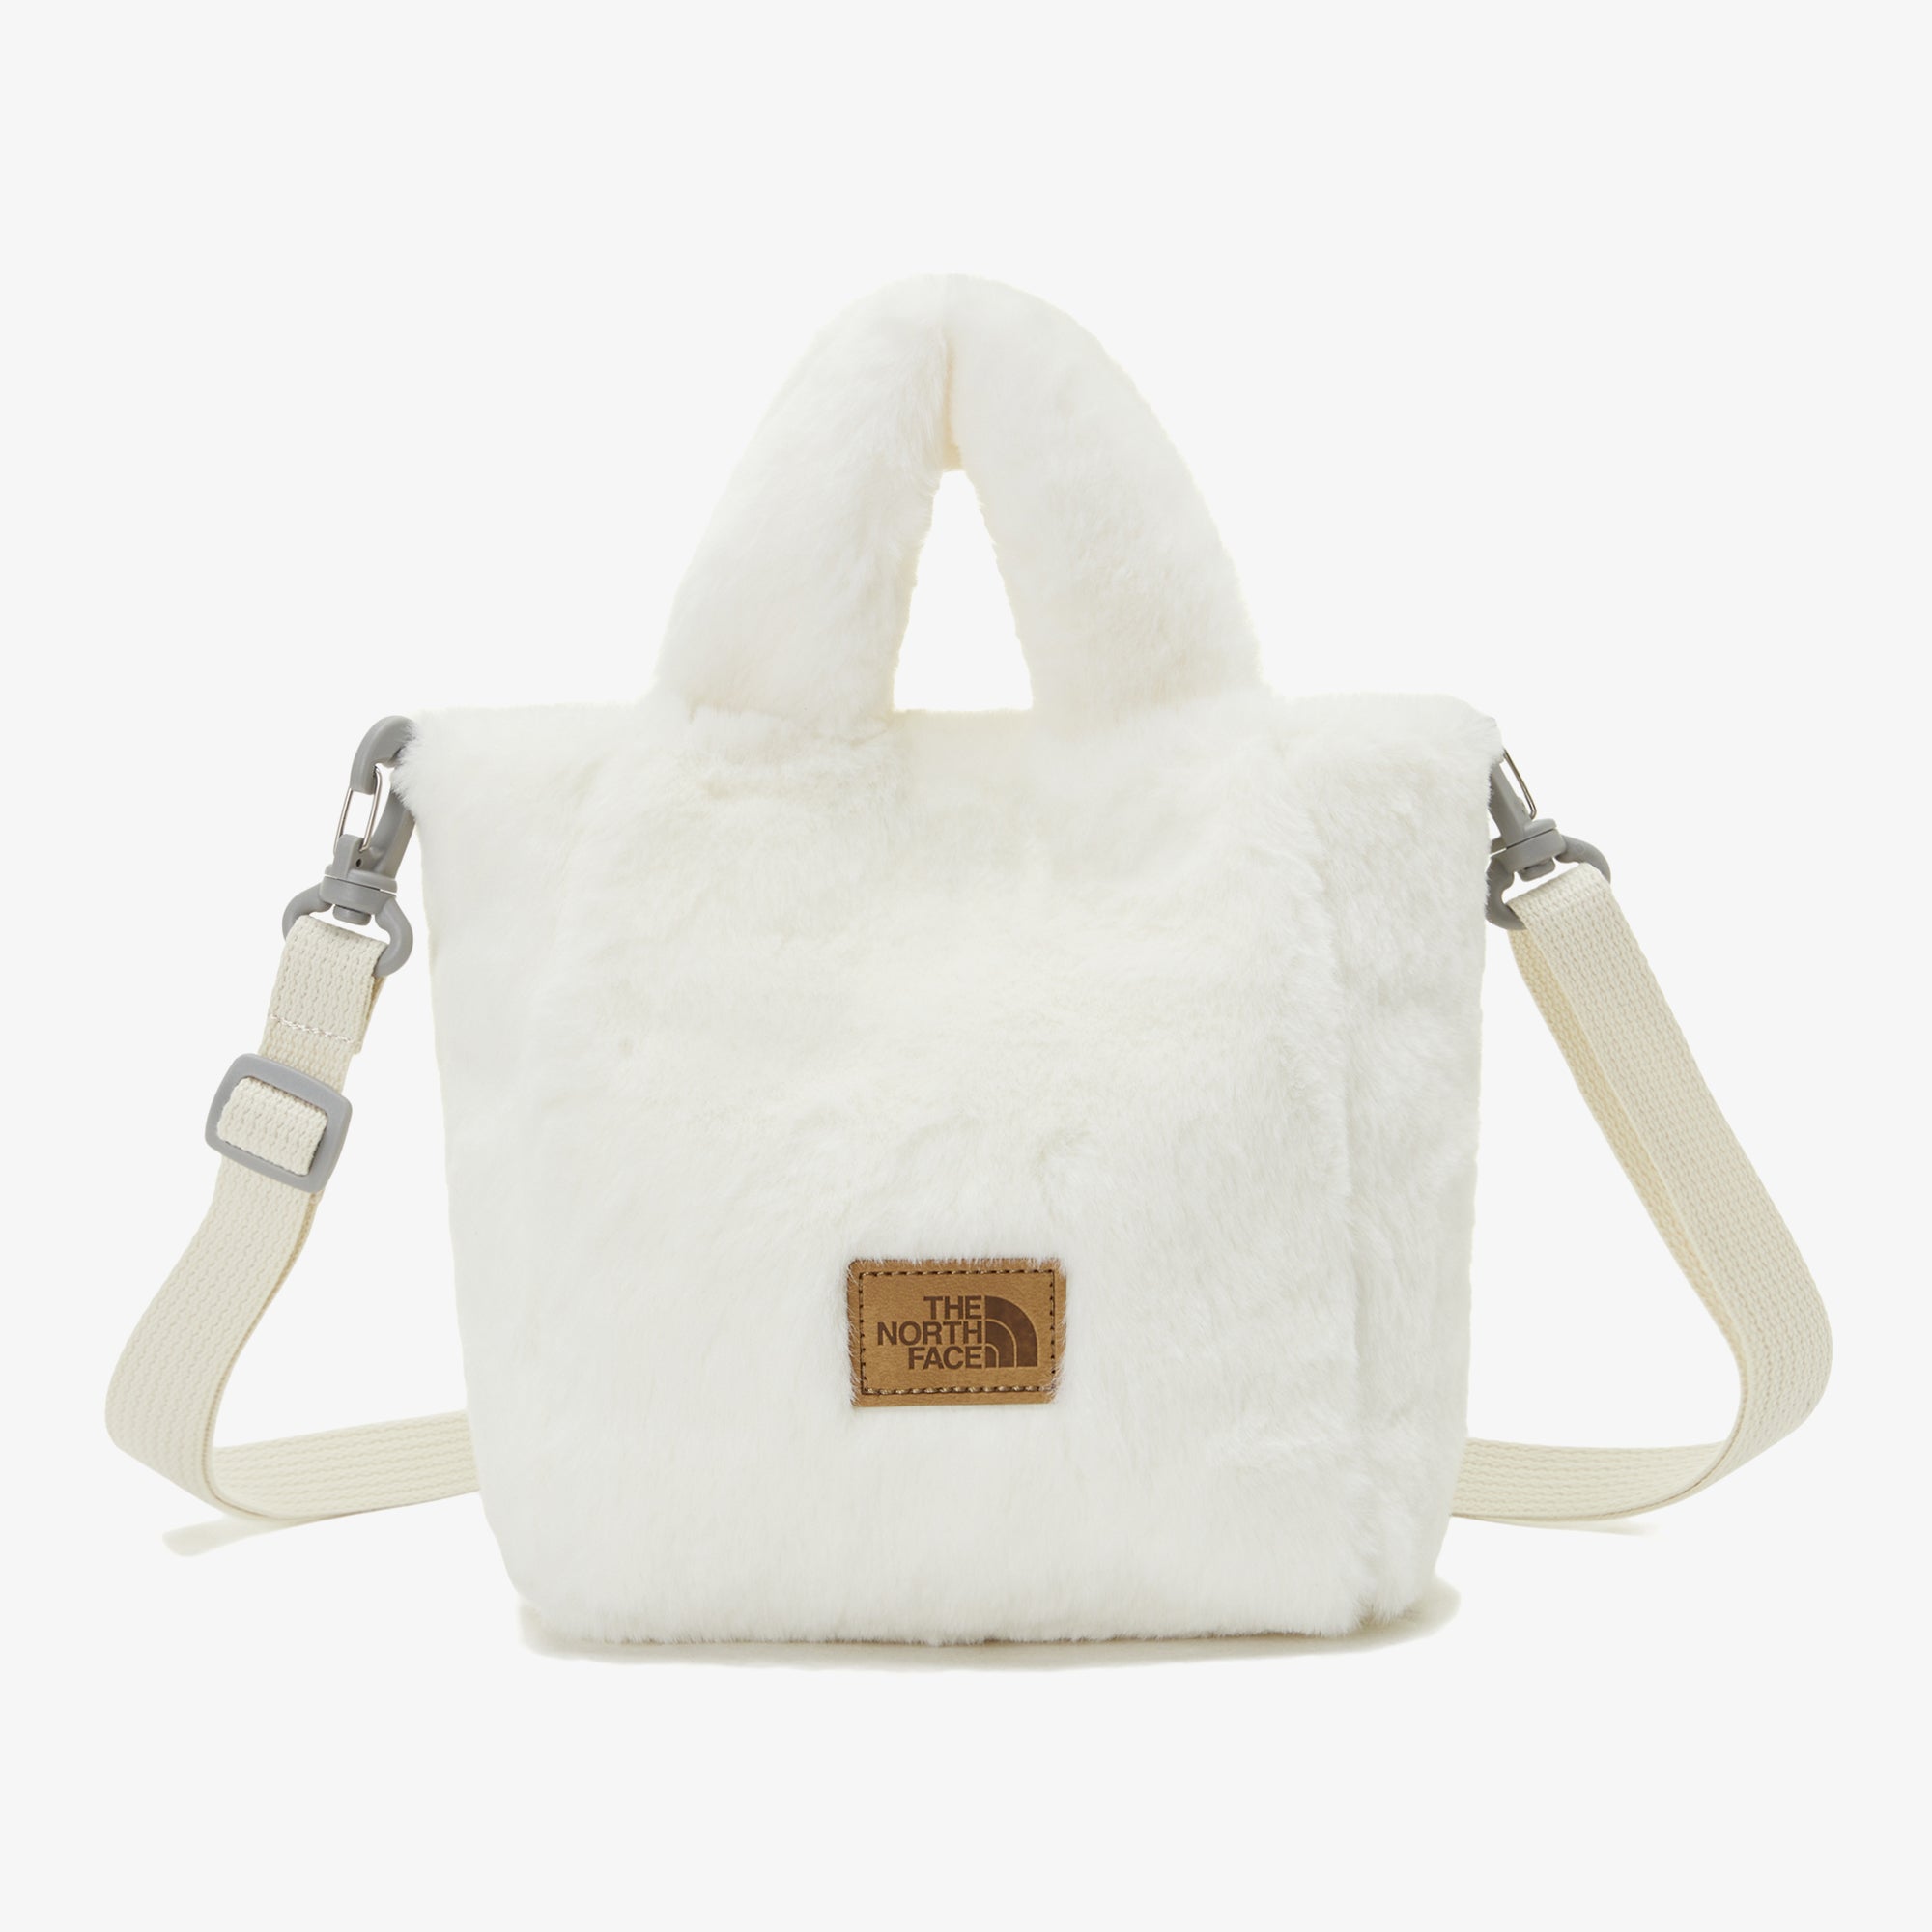 THE NORTH FACE] PLUMPY TOTE BAG NN2PP68N Siver